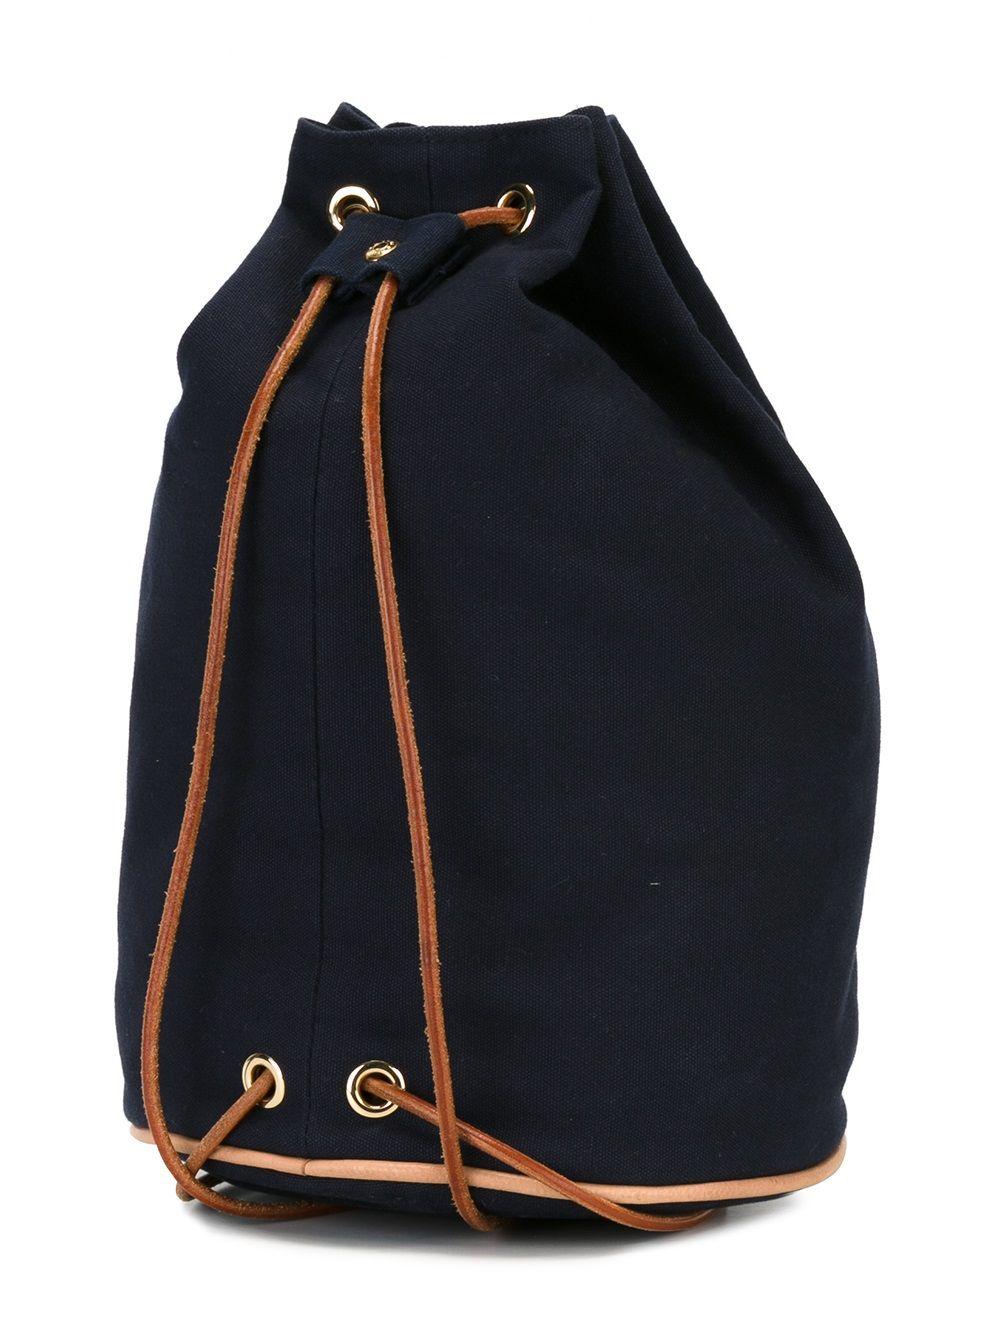 Hermès navy cotton shoulder bag “Matelot-Marin” featuring a front embroidered logo, a leather drawstring backpack, a natural leather shoulder tie and a fabric logo label.  100% cotton. 
Circa1990s 36cm X Diameter 24cm 
In good vintage condition .